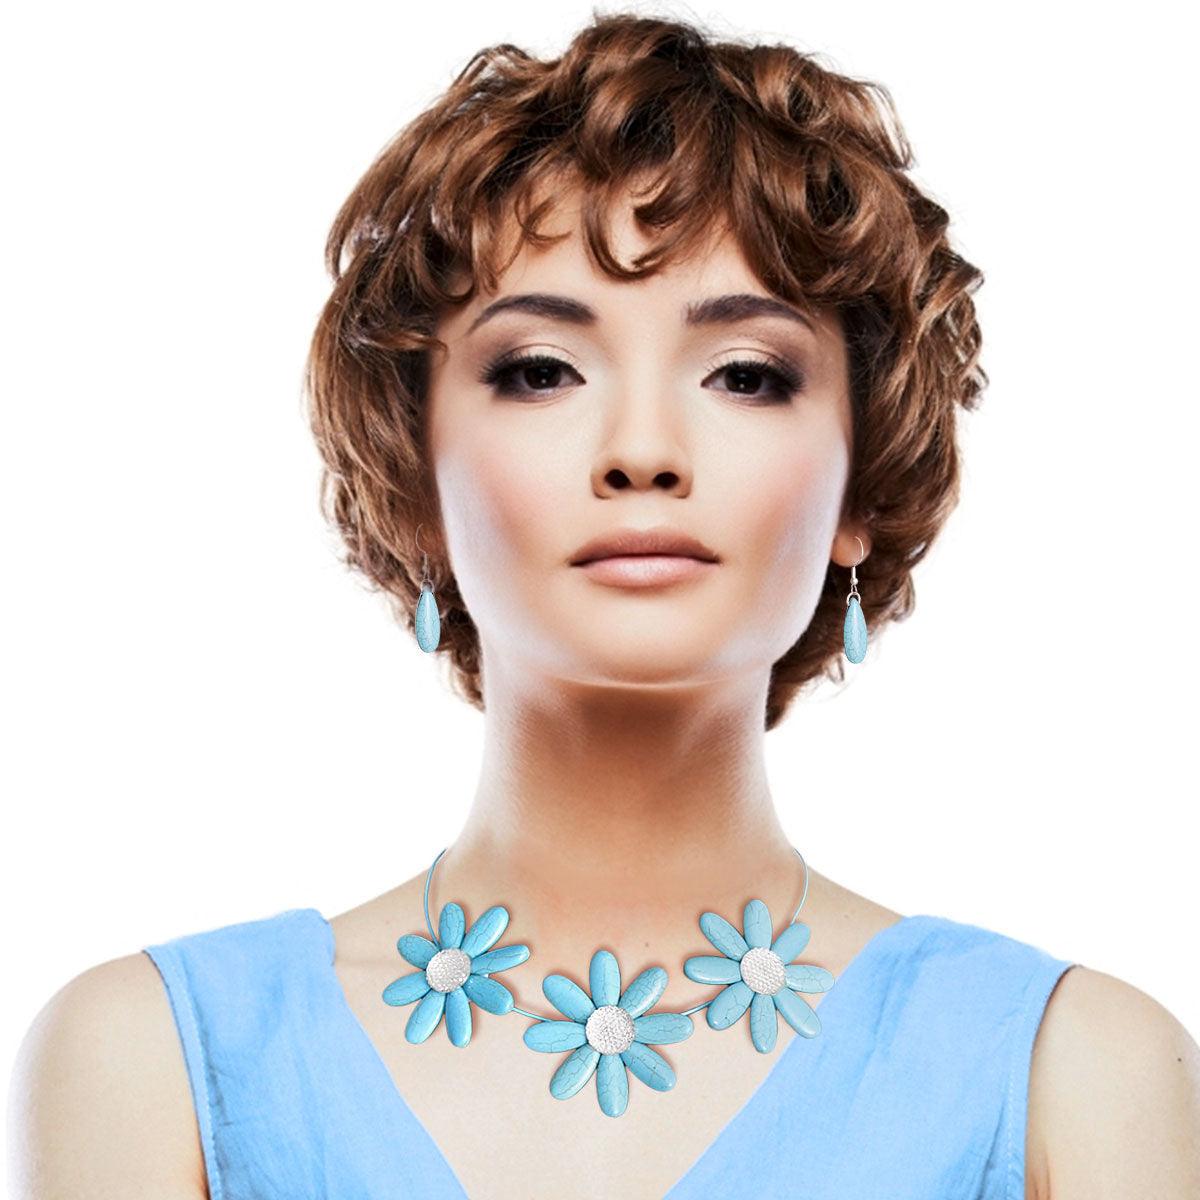 Buy Blue Daisy Necklace Set - Perfect Accessory for Summer